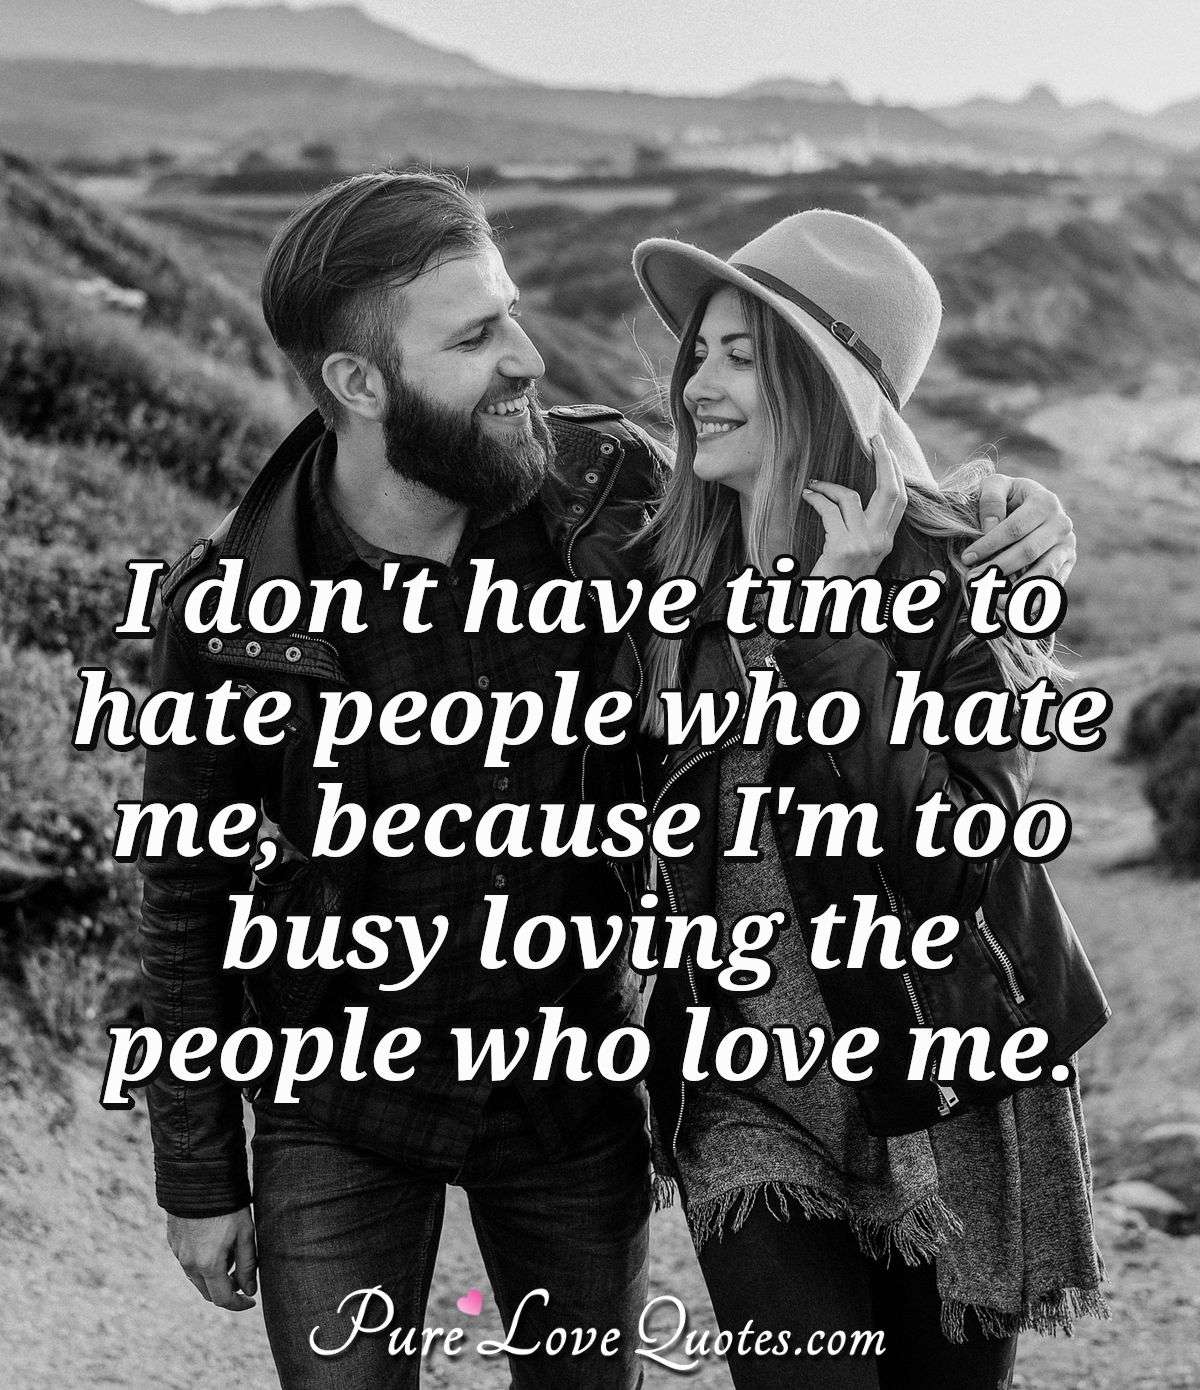 I don't have time to hate people who hate me, because I'm too busy loving the people who love me. - Anonymous